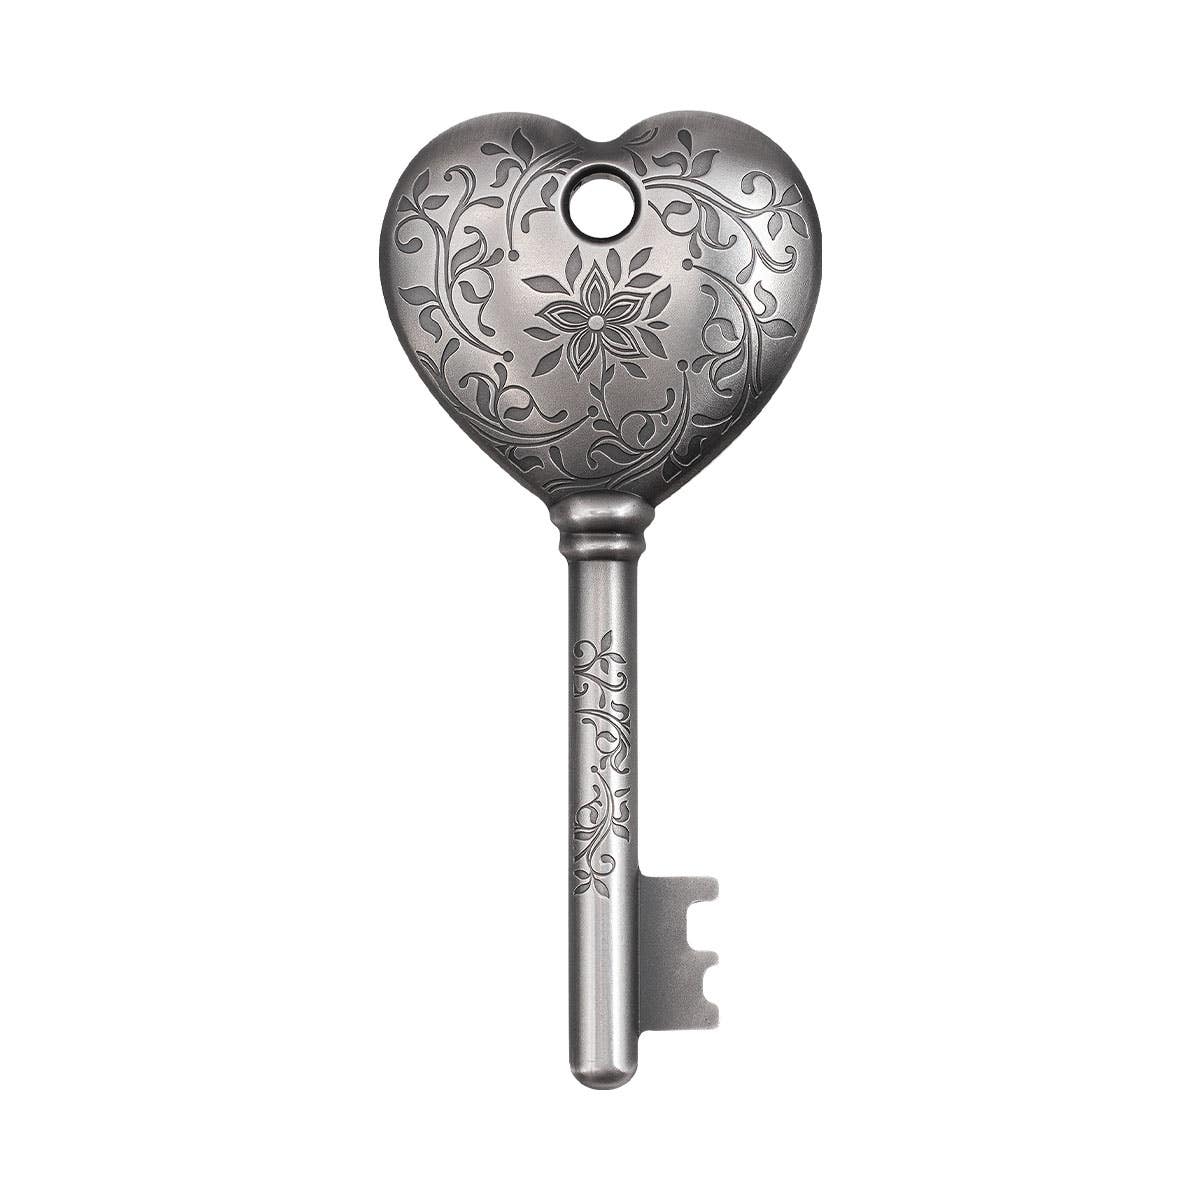 The Key to My Heart 2022 $5 1oz Silver Antiqued Coin